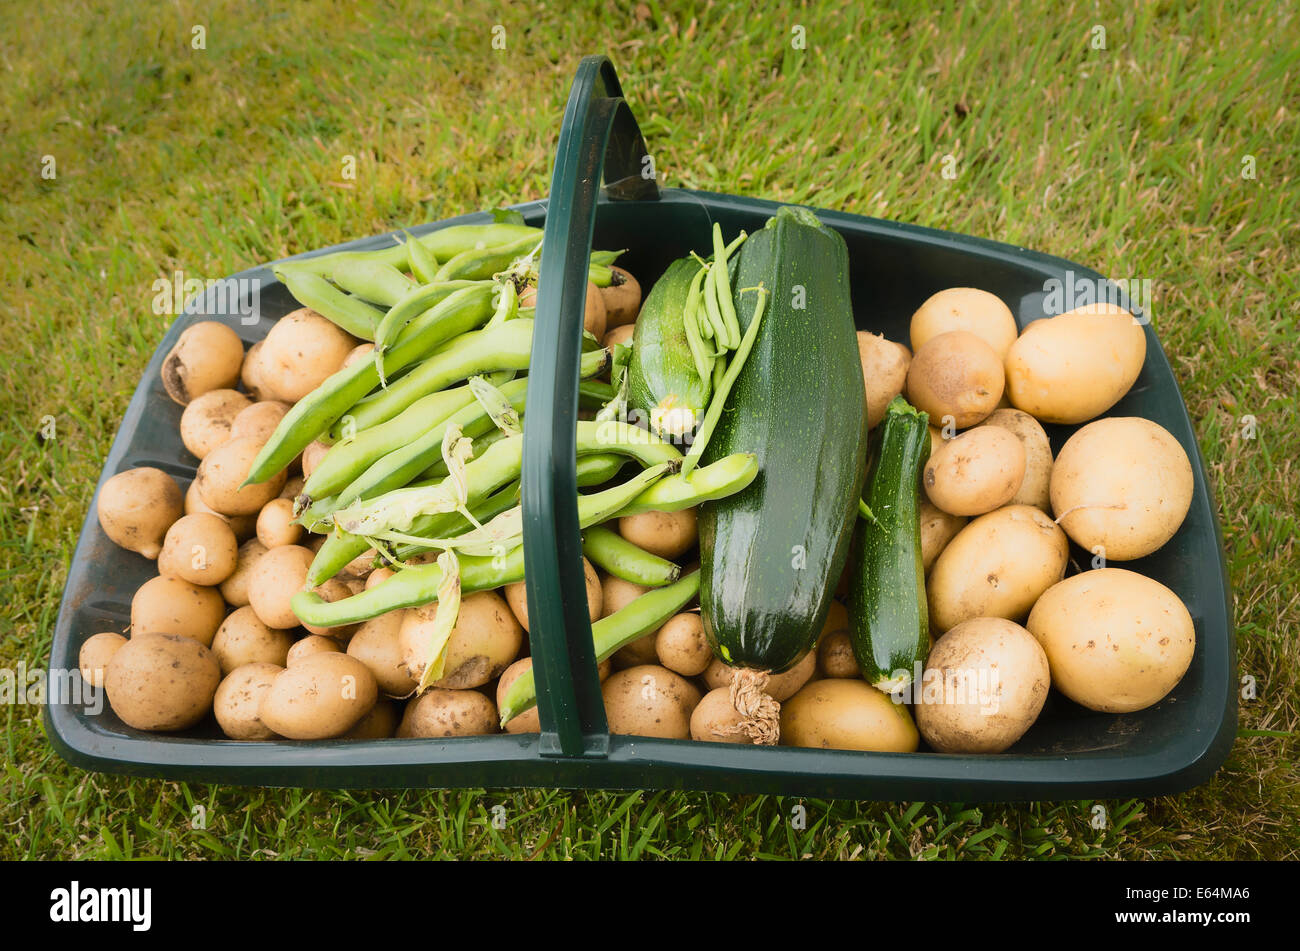 Trug containing freshly picked garden vegetable in July Stock Photo